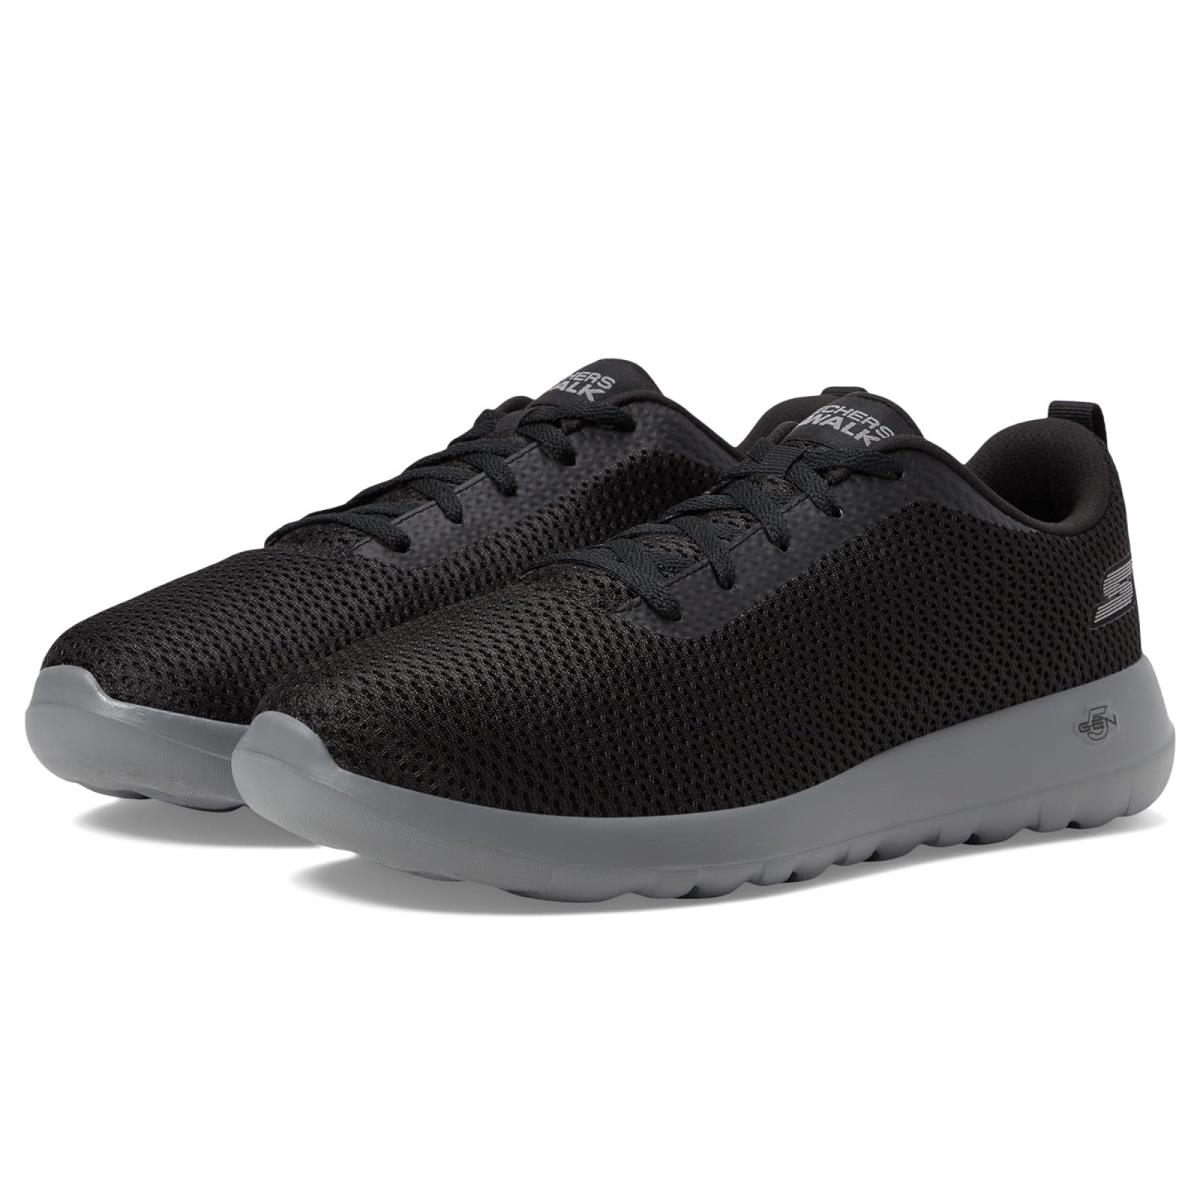 Man`s Sneakers Athletic Shoes Skechers Performance Go Walk Max - 54601 Black/Gray